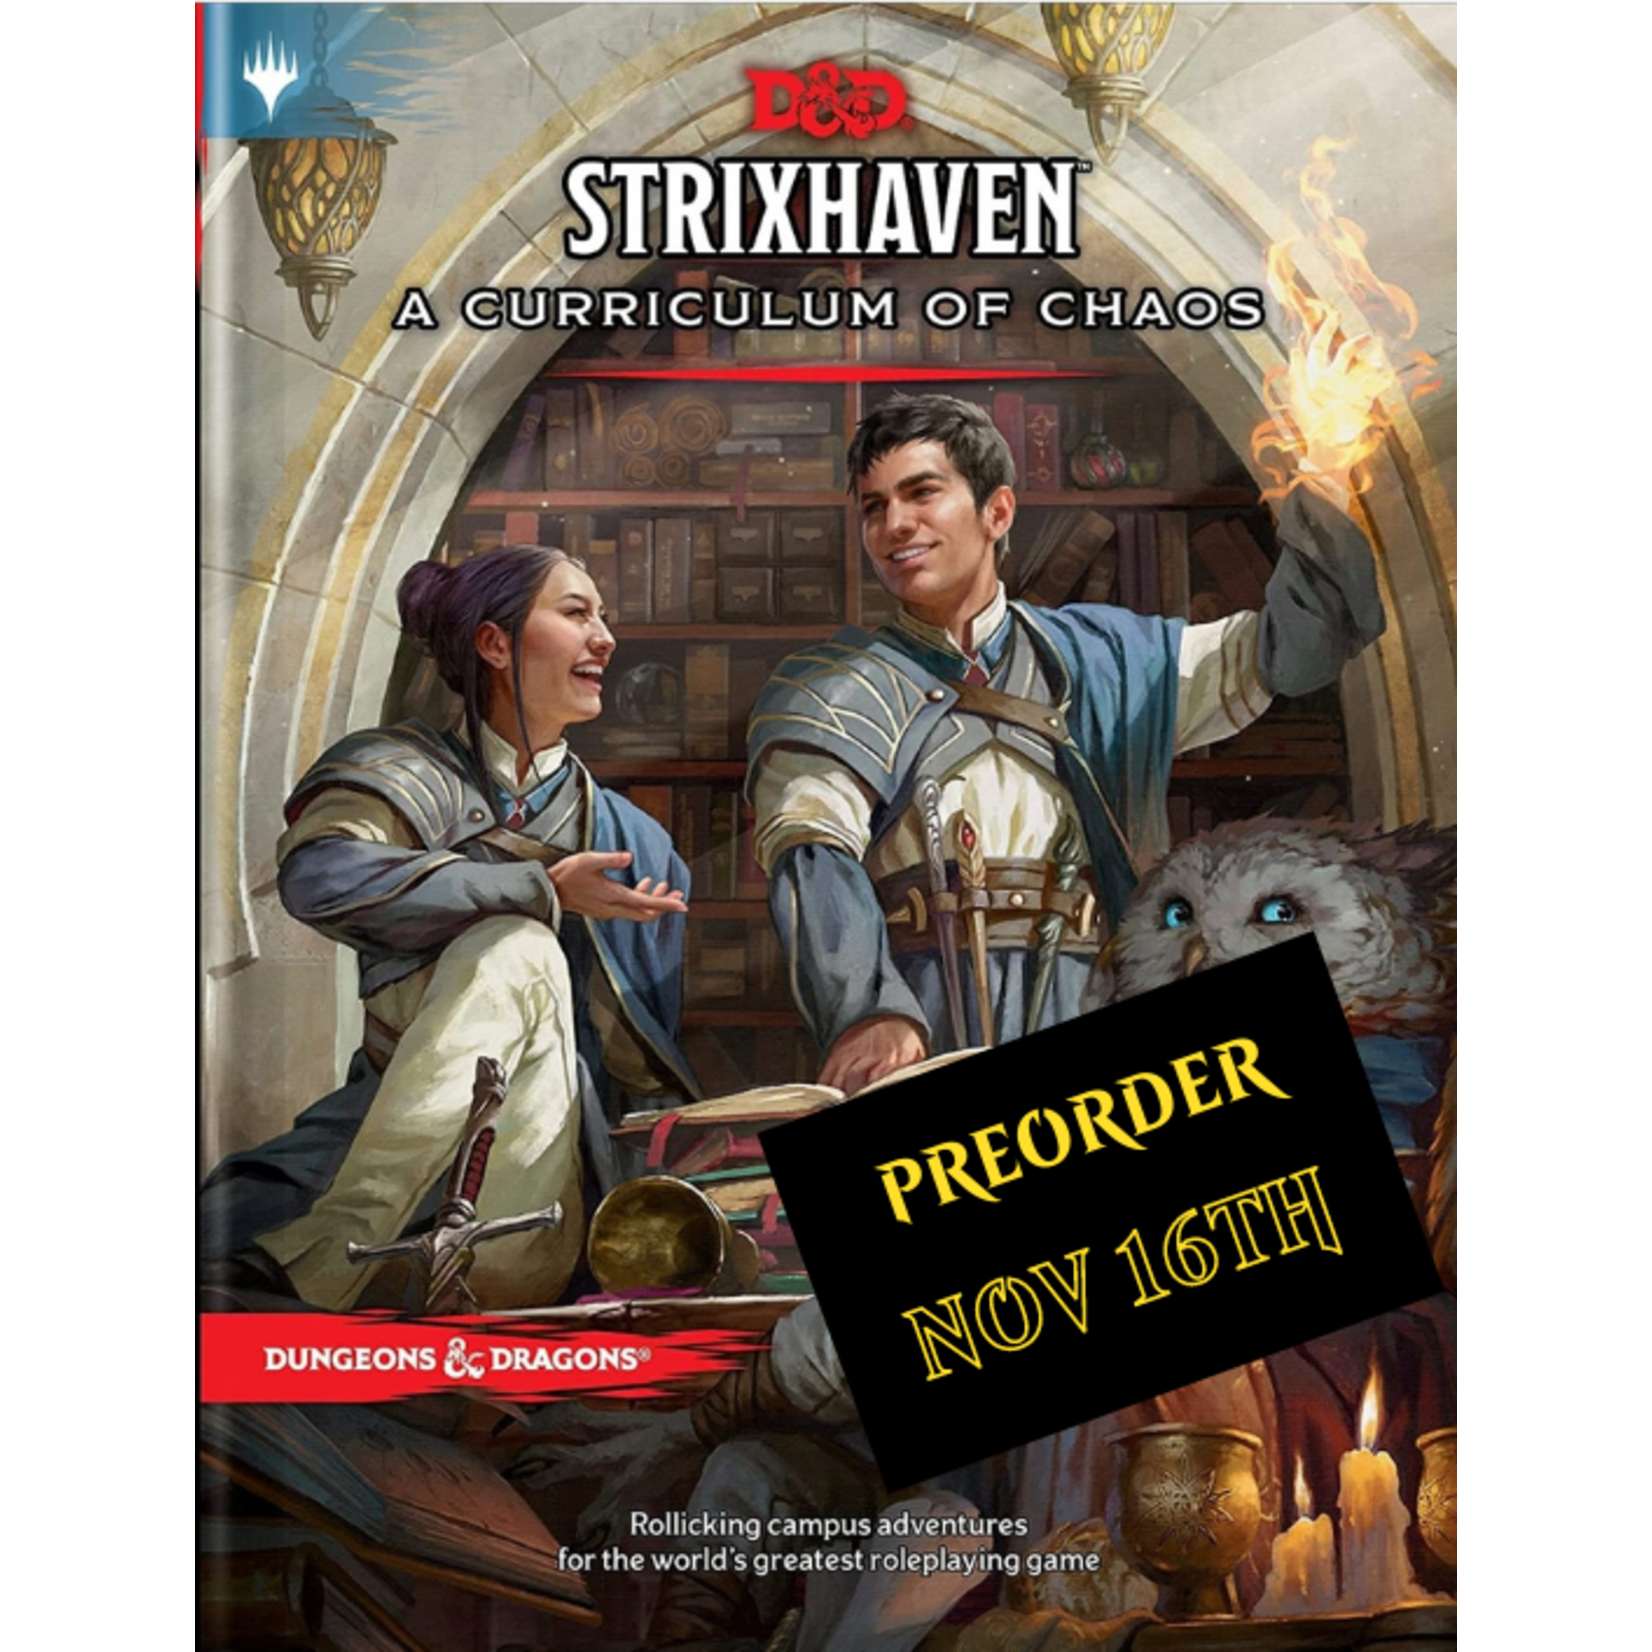 Strixhaven Curriculum of Chaos